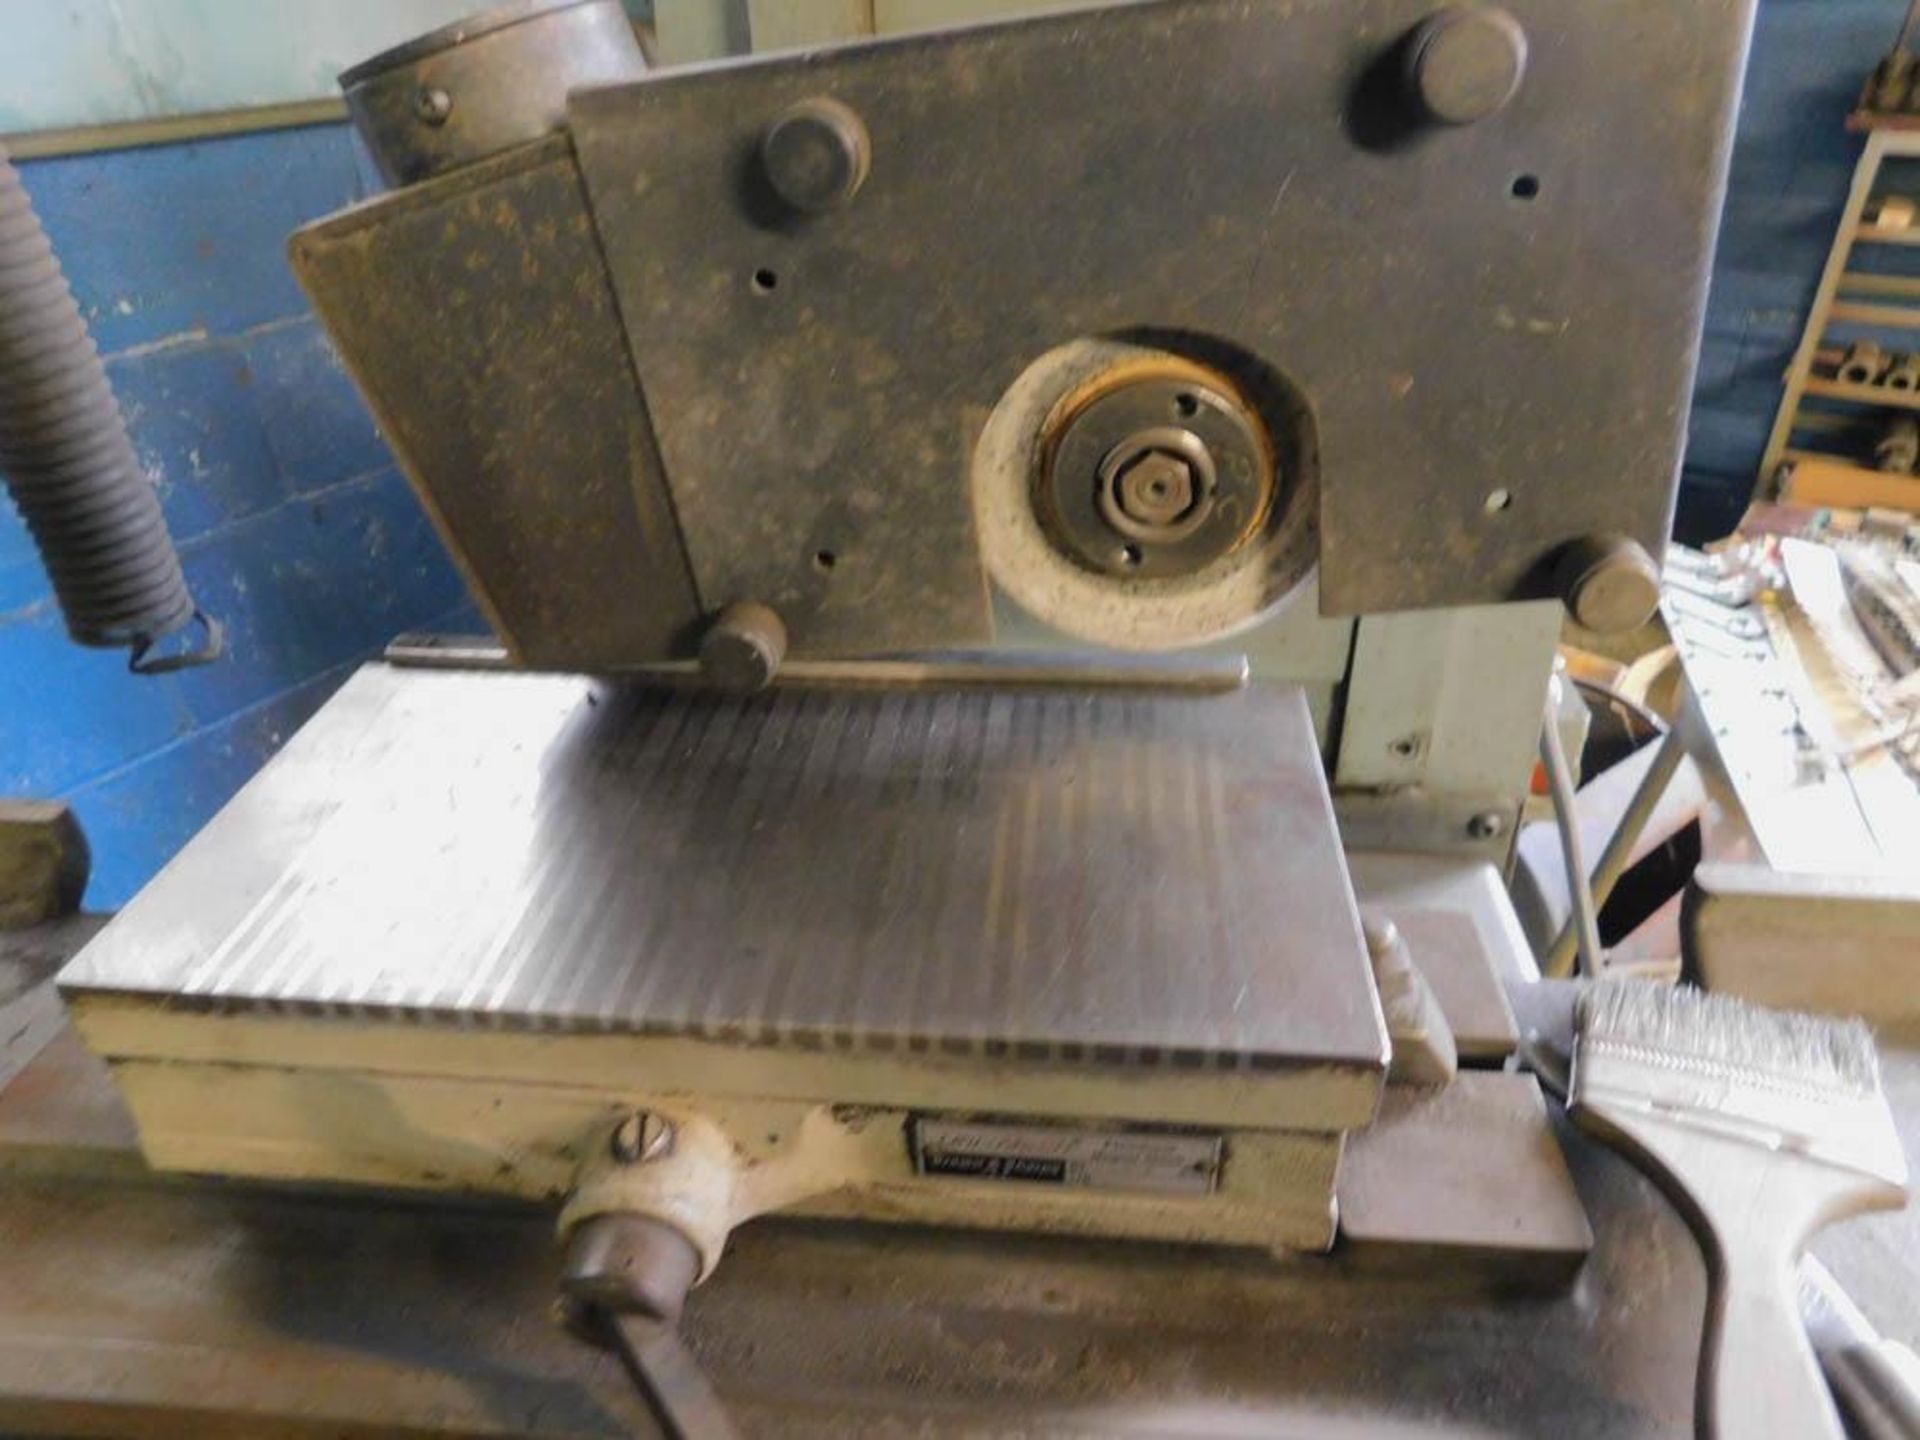 BROWN & SHARPE ""MICROMASTER 510"" HAND FEED SURFACE GRINDER - Image 4 of 4